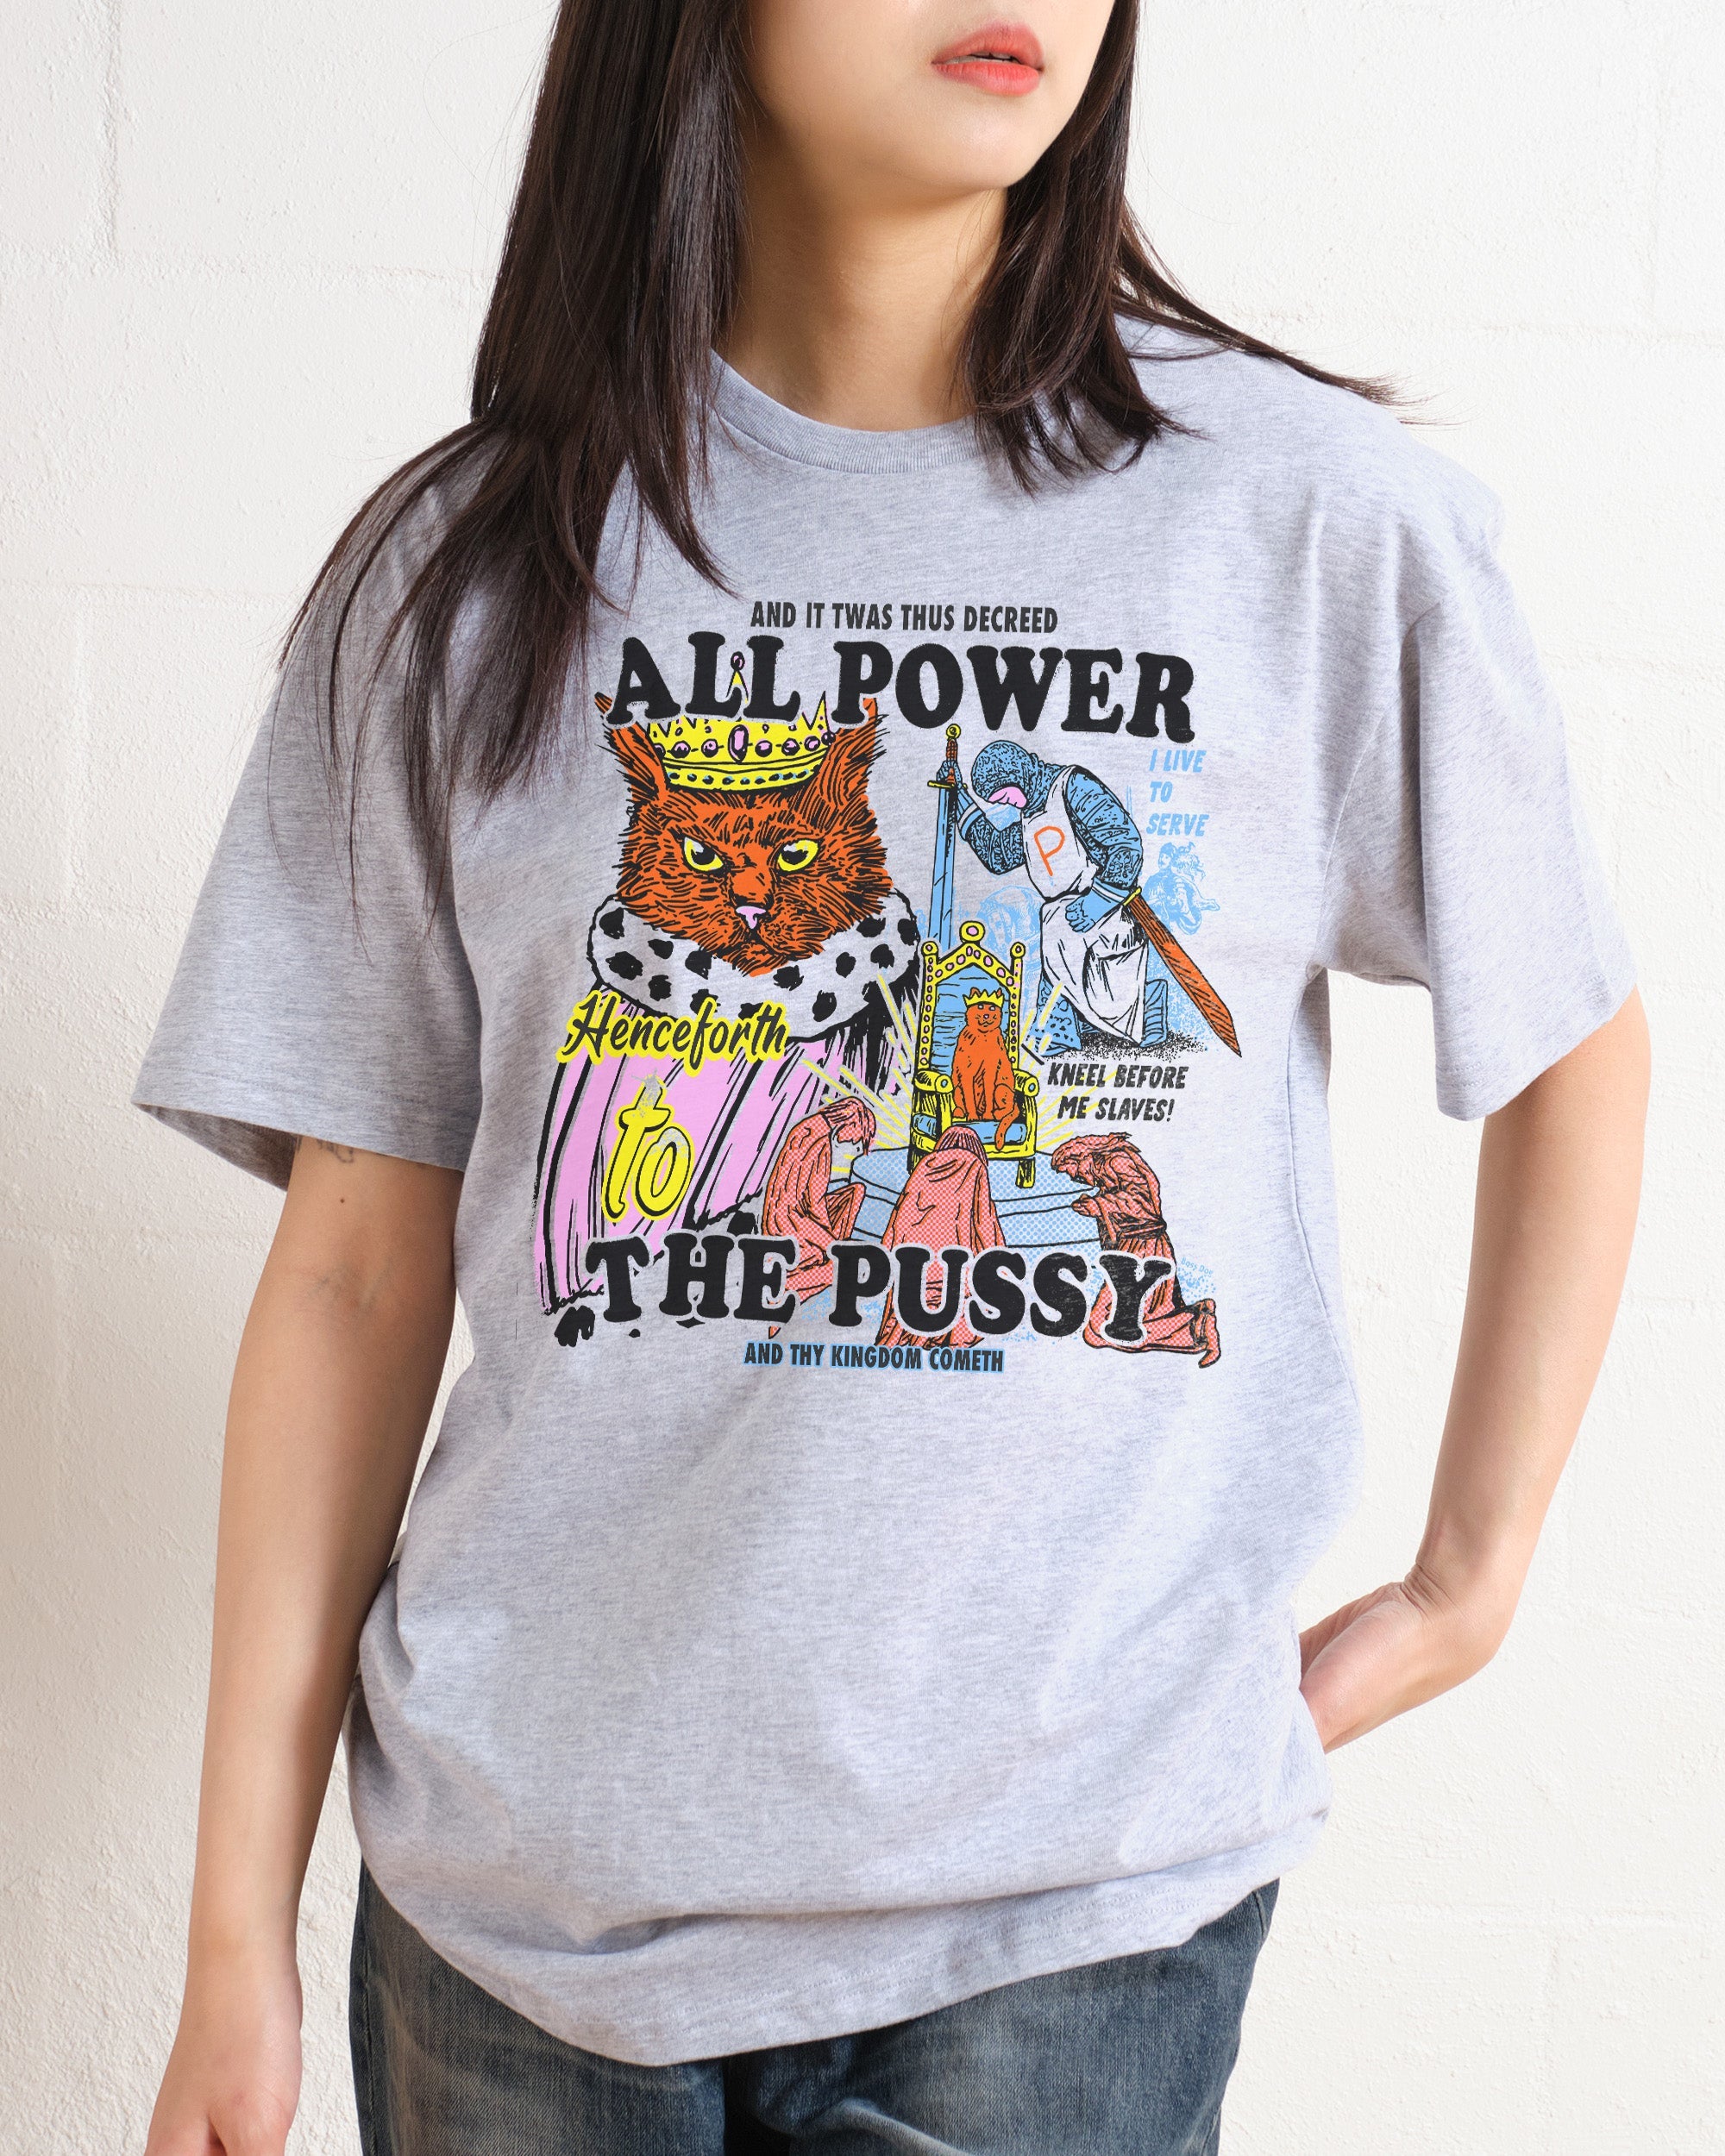 All Power To The Pussy T-Shirt Australia Online Grey